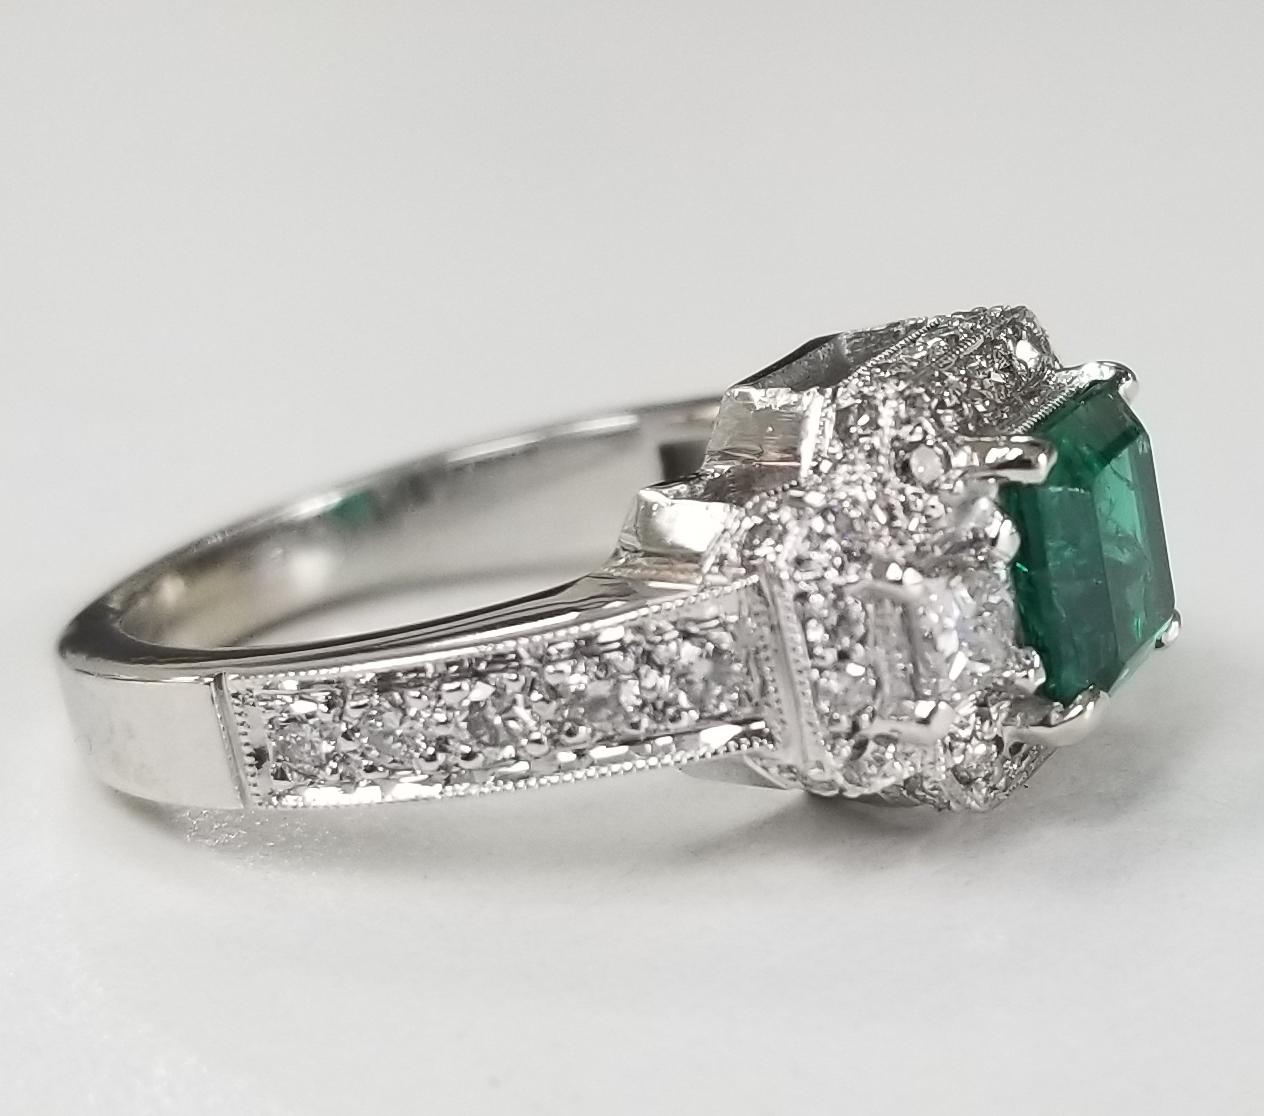 14 karat white gold square emerald and halo diamond ring, containing 1 GIA square emerald of gem quality weighing 1.26cts., flanked with 2 princess cut diamonds on either side of fine quality weighing .40pts. and 40 round full cut diamonds of fine